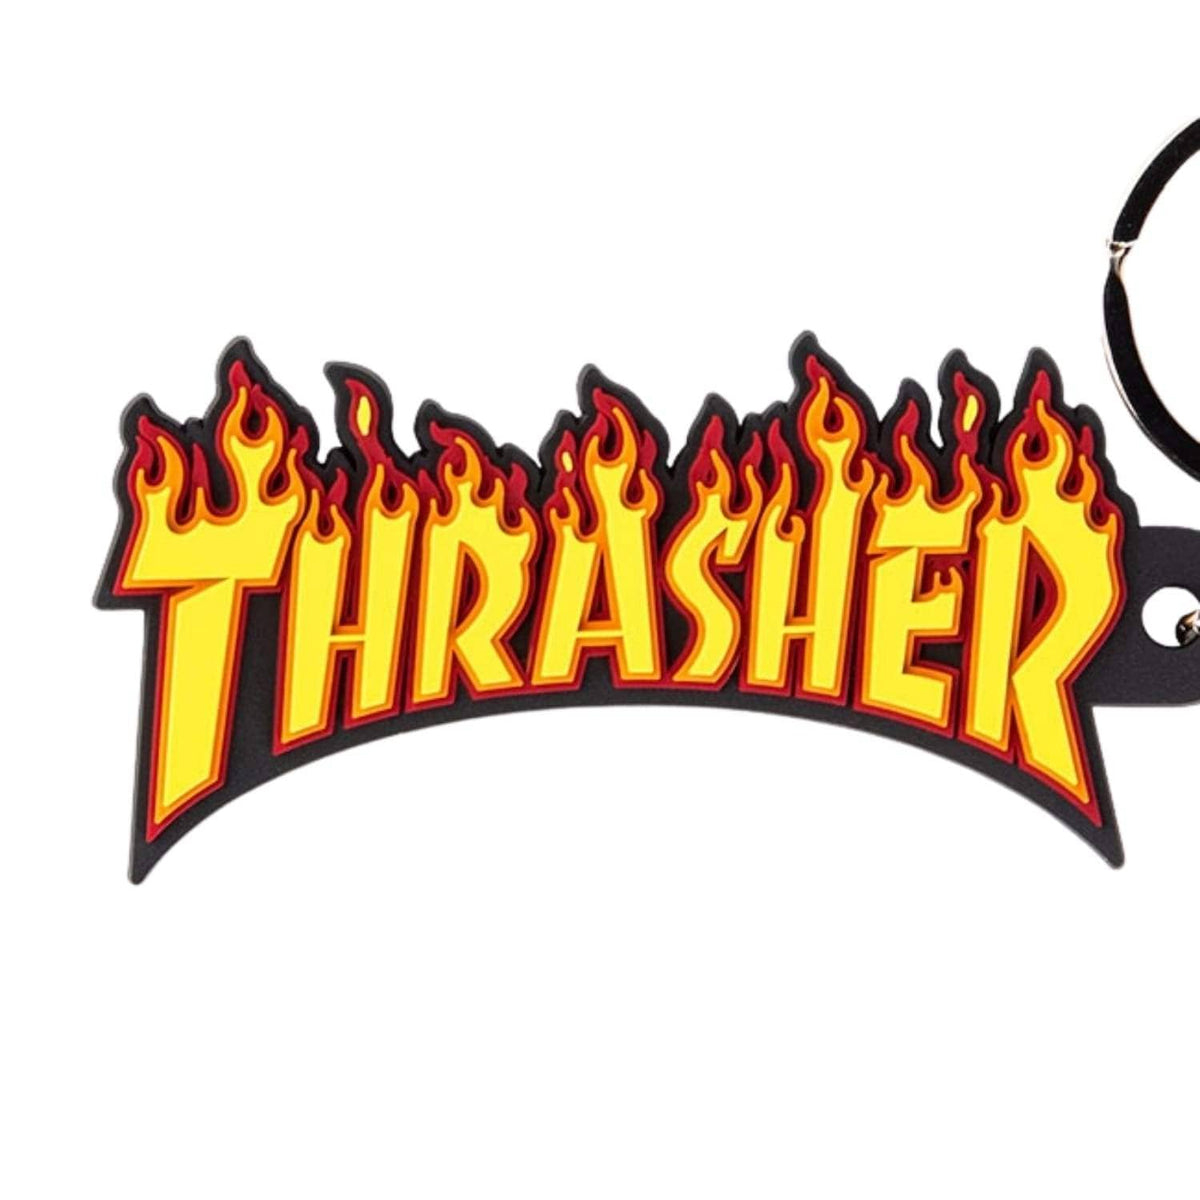 Thrasher Flame Logo Keychain Black Yellow - Gifts for Skateboarders by Thrasher